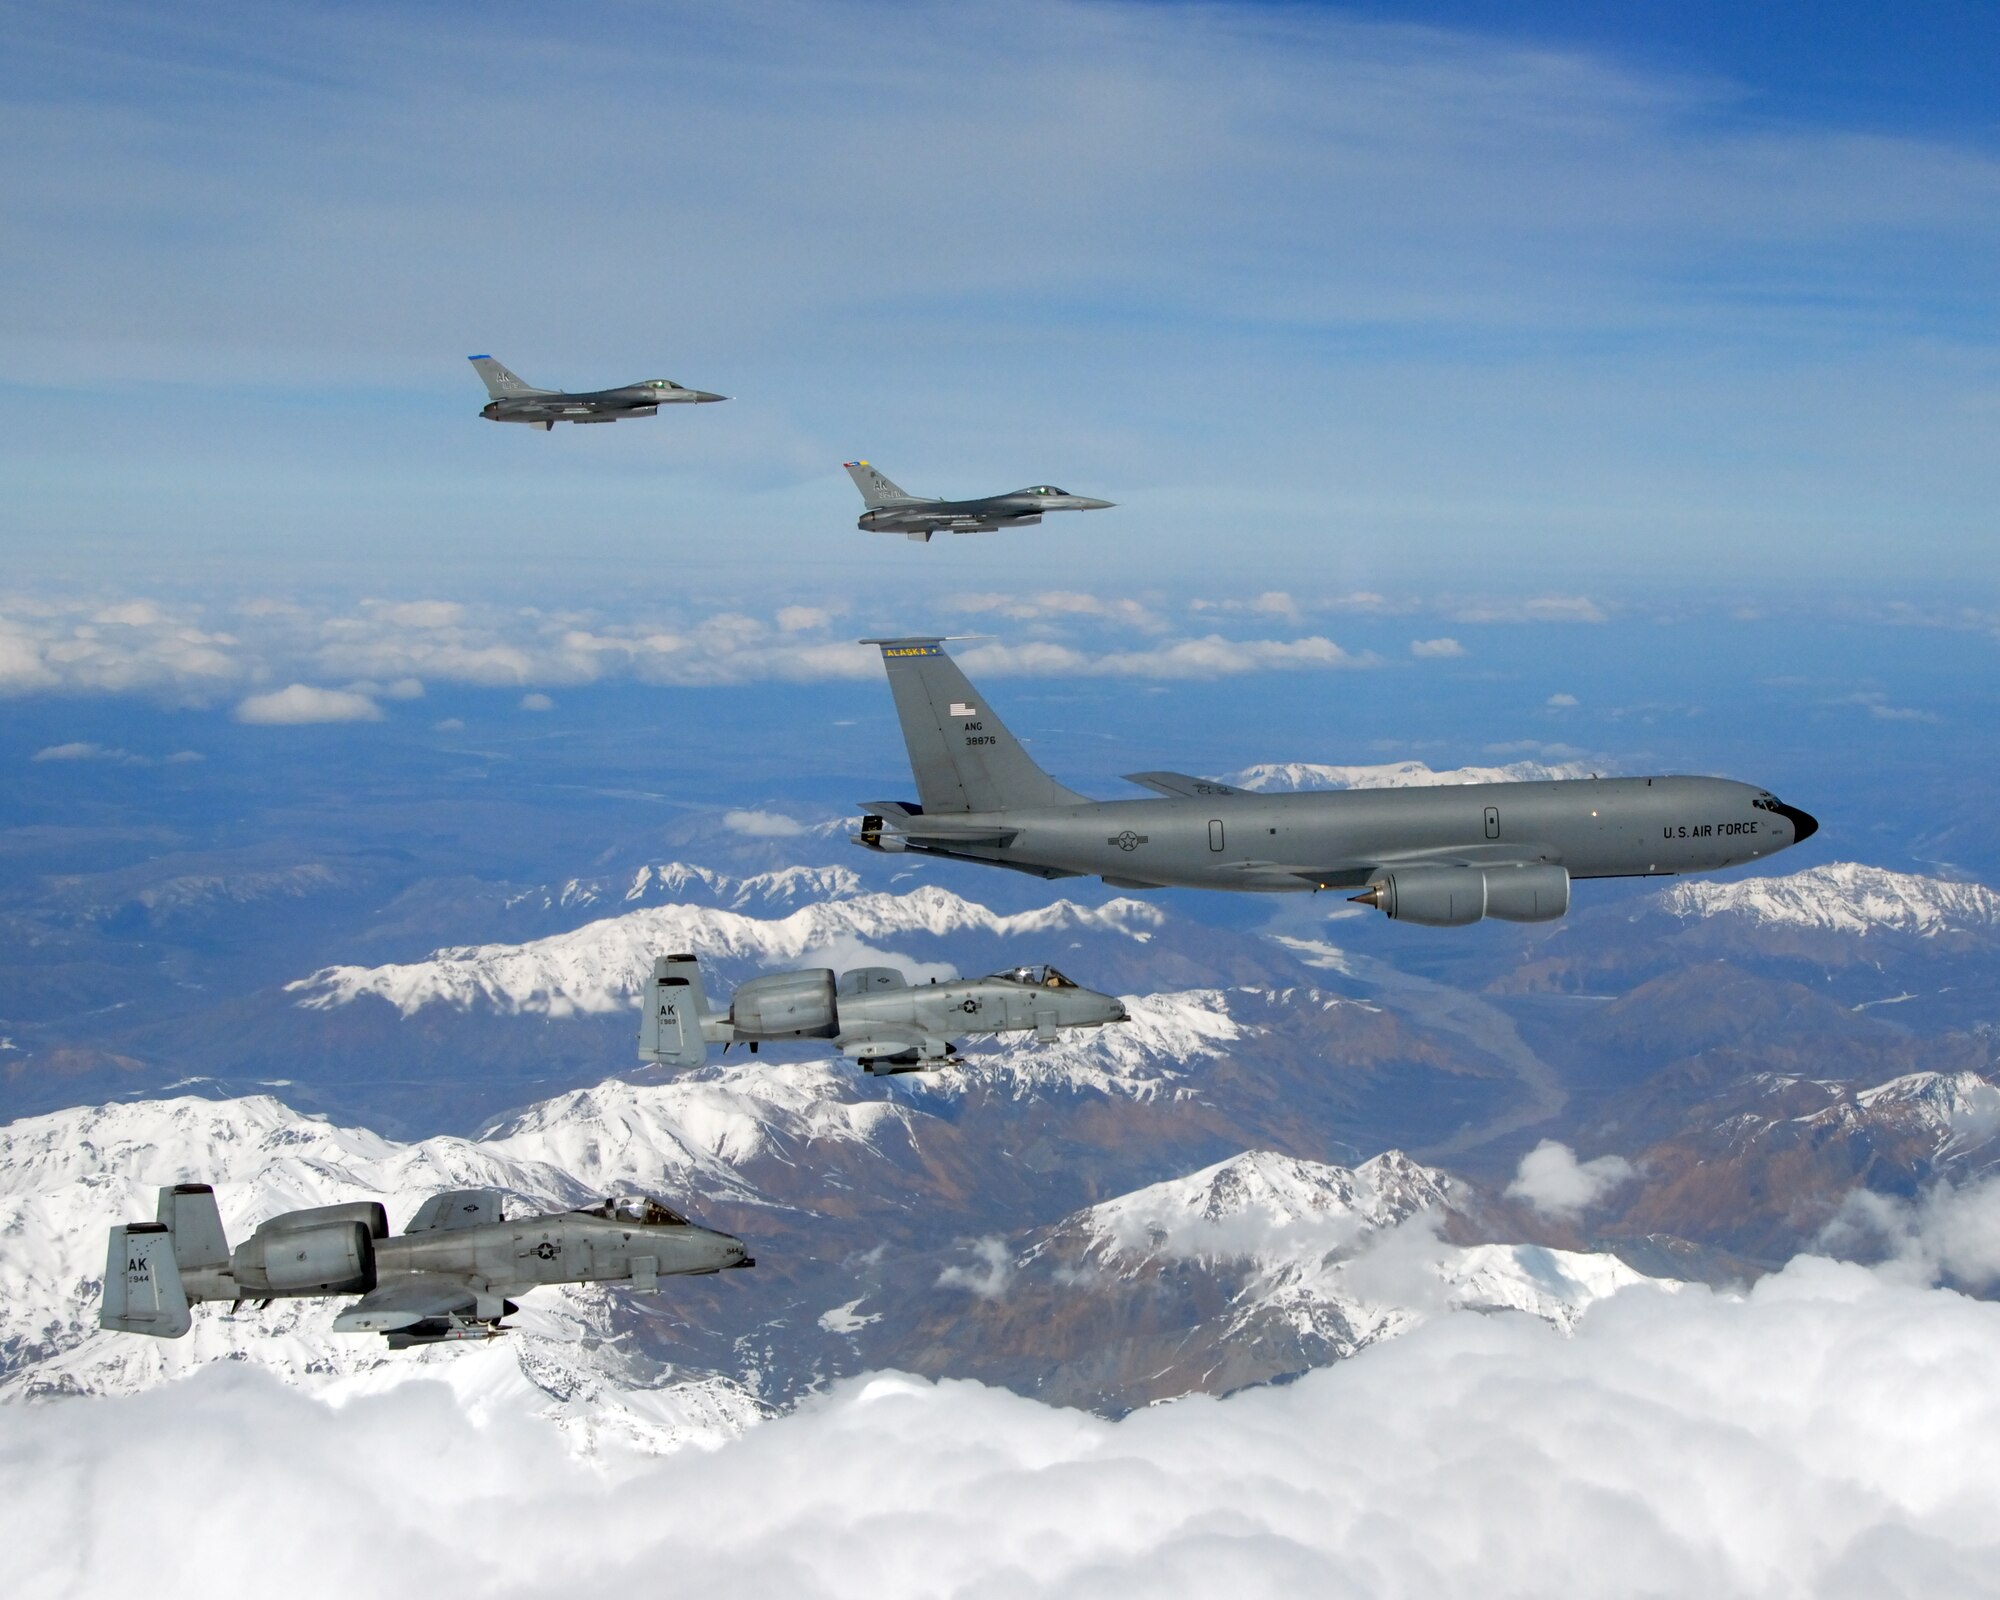 EIELSON AIR FORCE BASE, Alaska -- A KC-135R Stratotanker, 168th Air Refueling Wing, Alaska Air National Guard, flies in formation with two F-16 Fighting Falcons from the 18th Fighter Squadron, and two A-10 Wathog II's from the 355th Fighter Squadron May 29, 2007.  The five aircraft assigned to Eielson flew in formation for the last time due to the deactivation of the 355th FS, and the 18th FS.  (U.S. Air Force photo by Master Sergeant Rob Wieland)